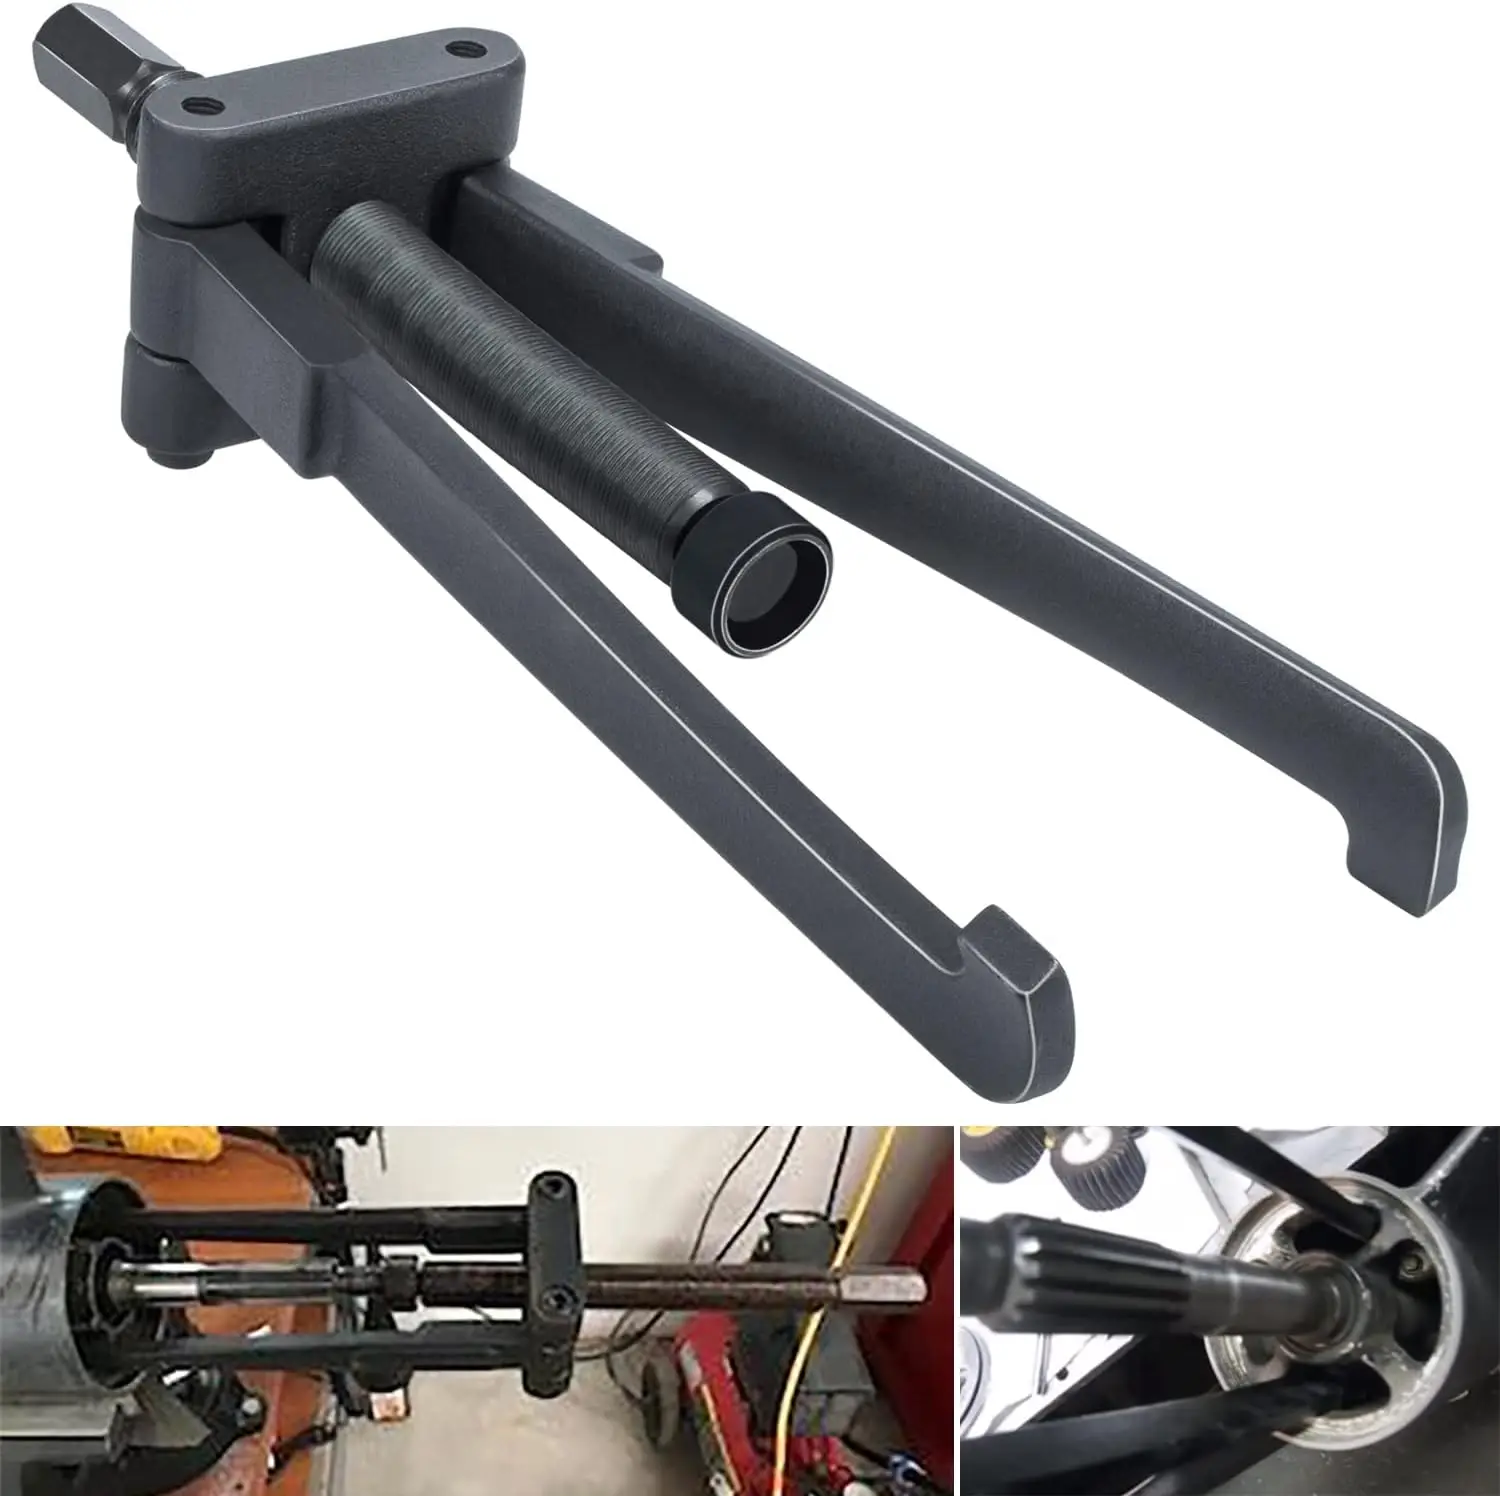 

Bearing Puller for , Johnson, Evinrude, Mercury, , Mercruiser, Fit Most Gearcases 115hp and Above with Adjustable Arms Upgrade